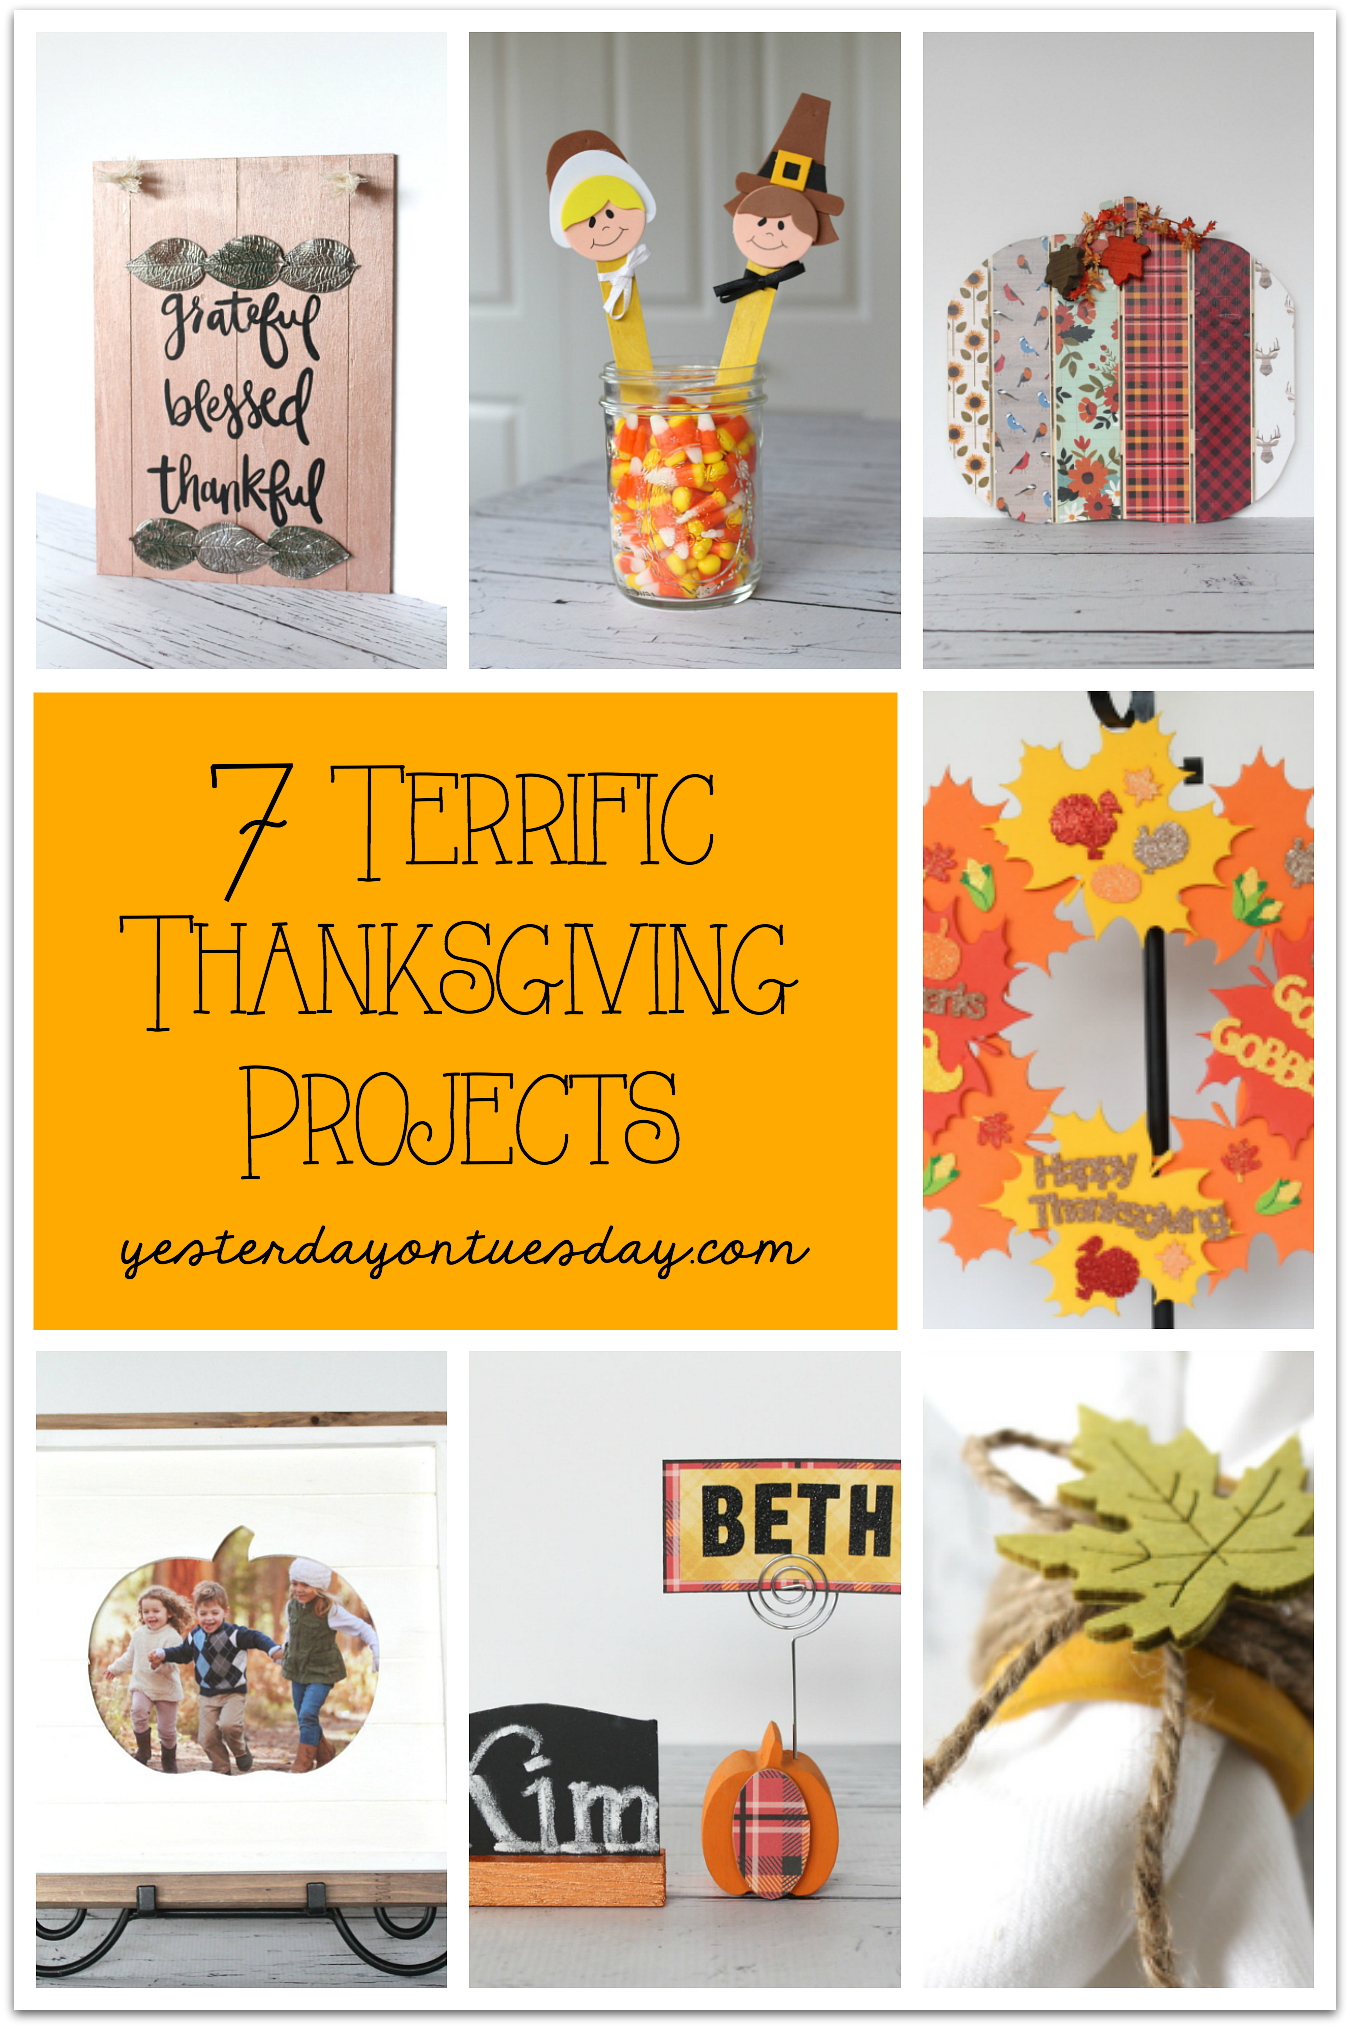 7 Terrific Thanksgiving Projects